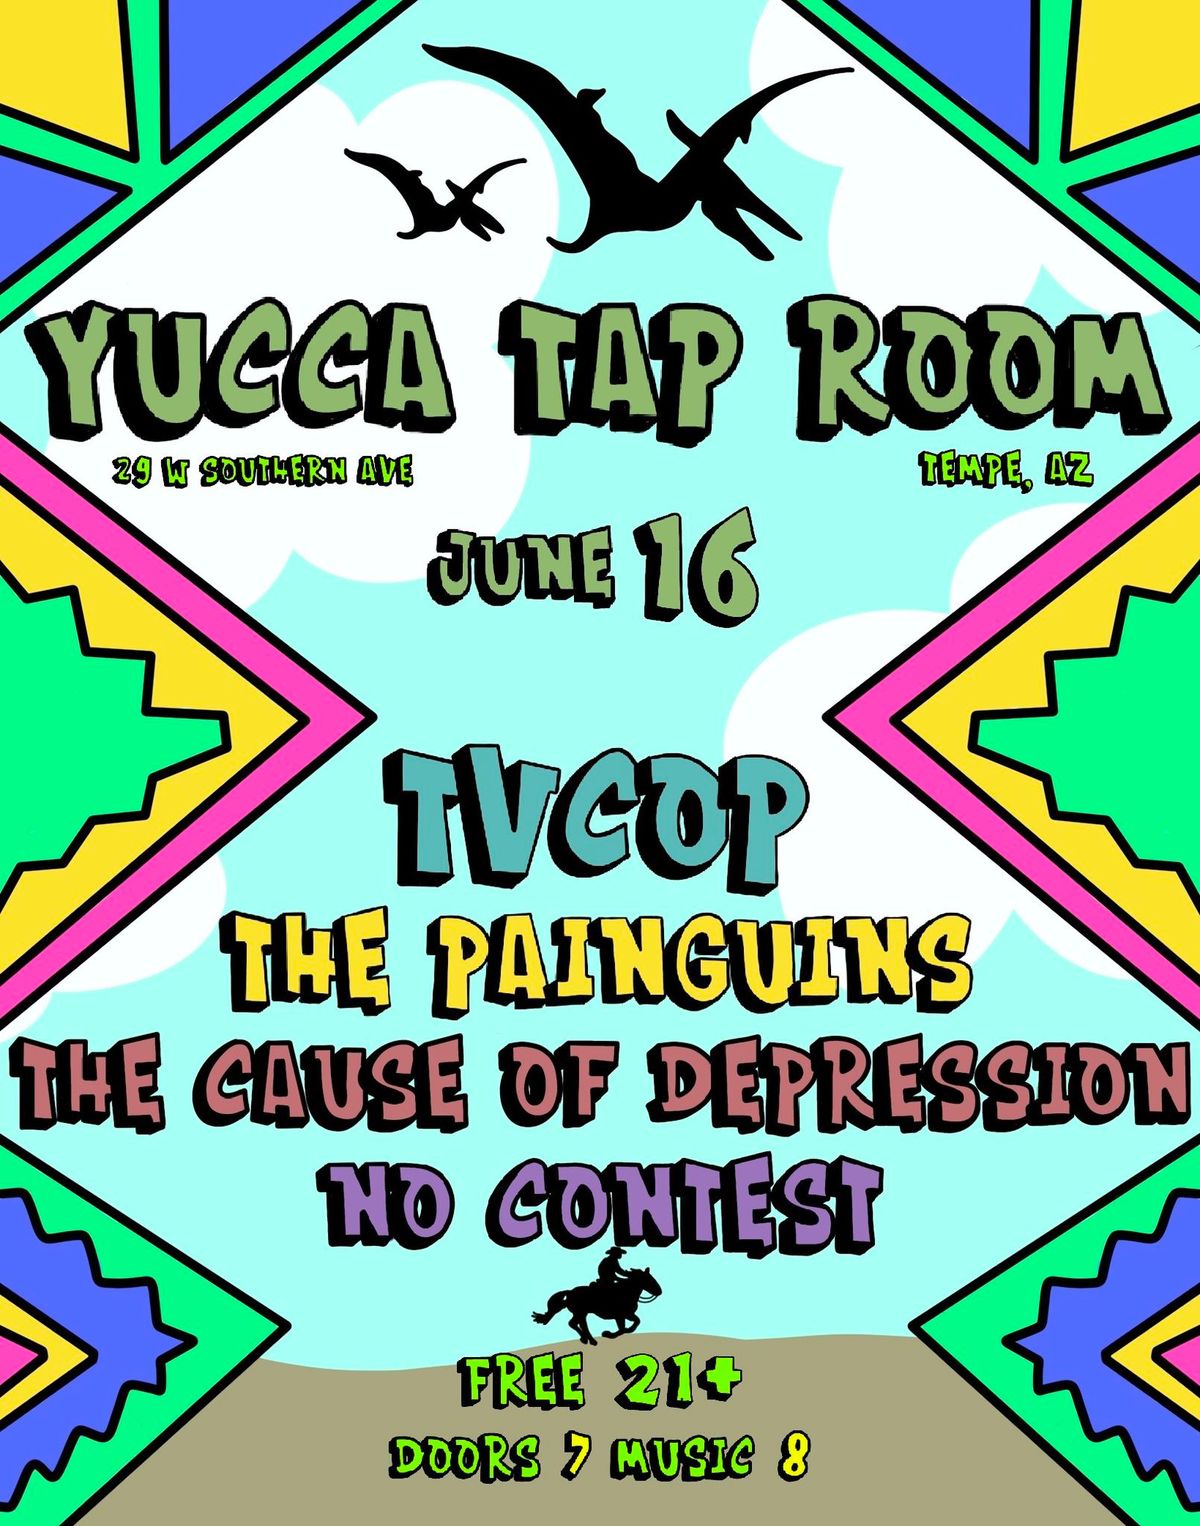 TV COP \/ PAINGUINS w\/ THE CAUSE OF DEPRESSION and NO CONTEST at YUCCA TAP ROOM